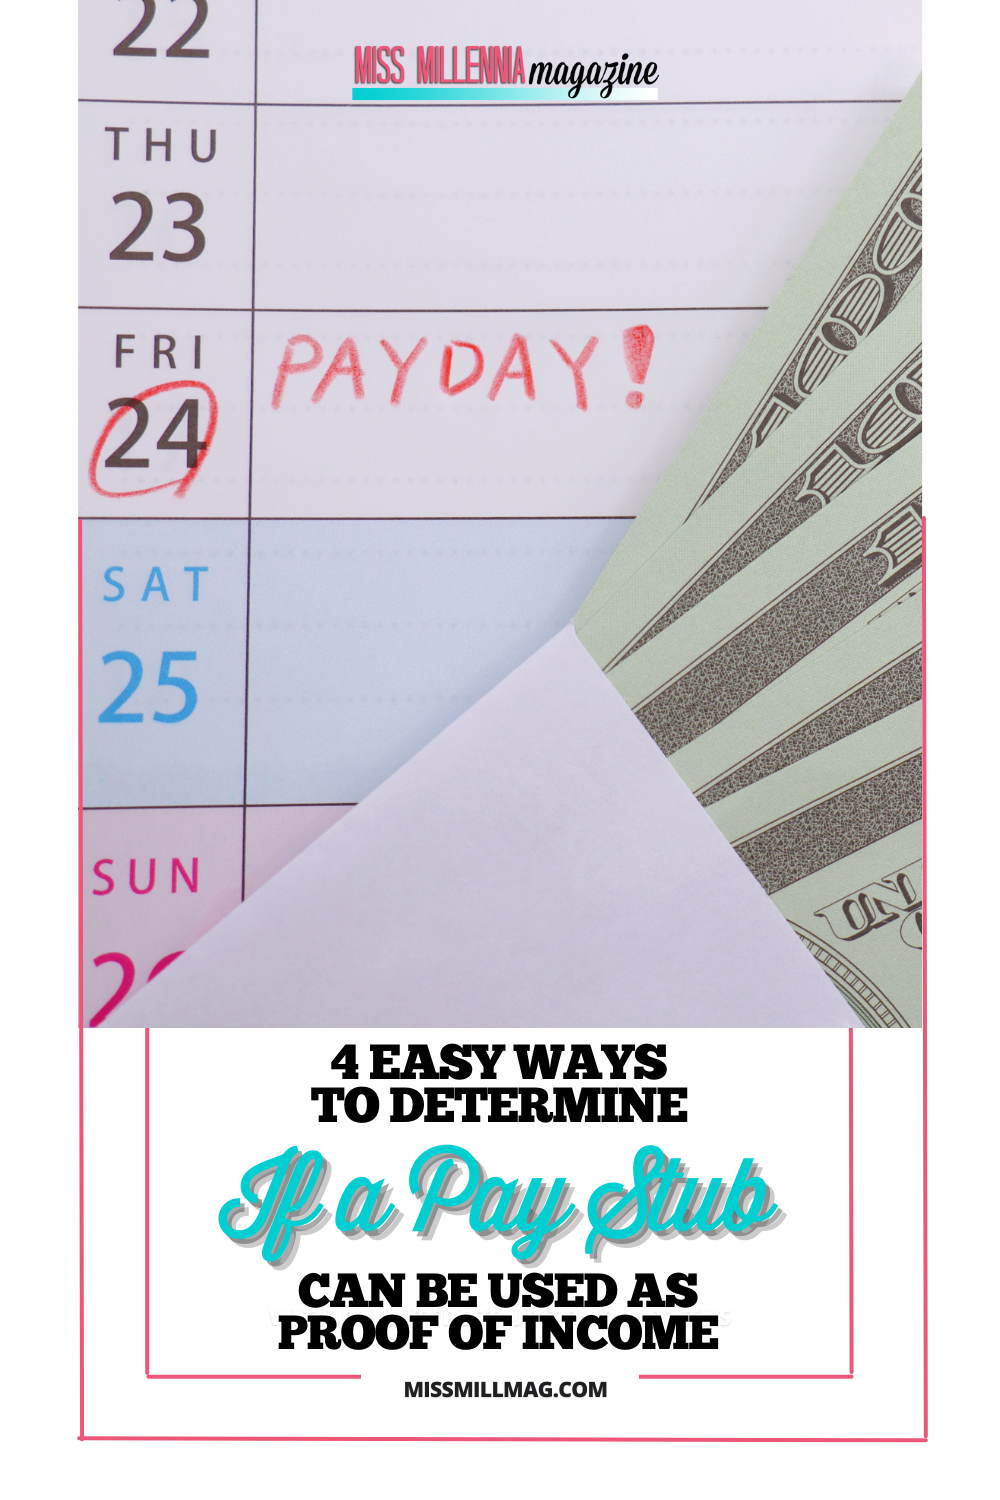 4 Easy Ways To Determine If a Pay Stub Can Be Used as Proof of Income